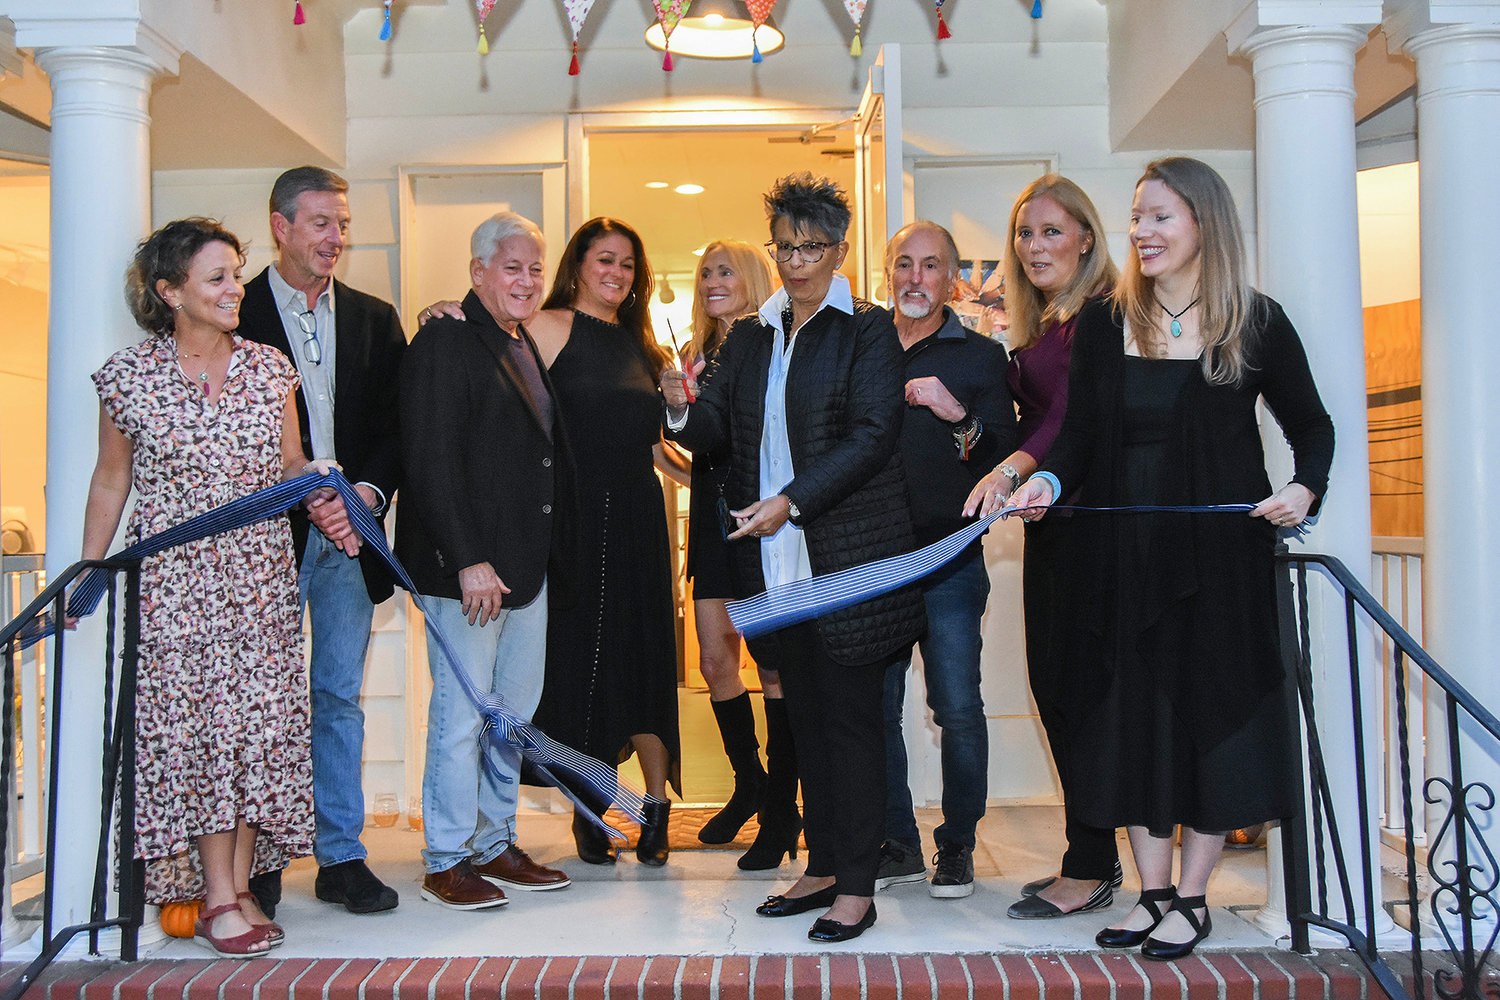 Members of the Arts Council and government officials helped cut the ribbon before opening the doors of the new building.